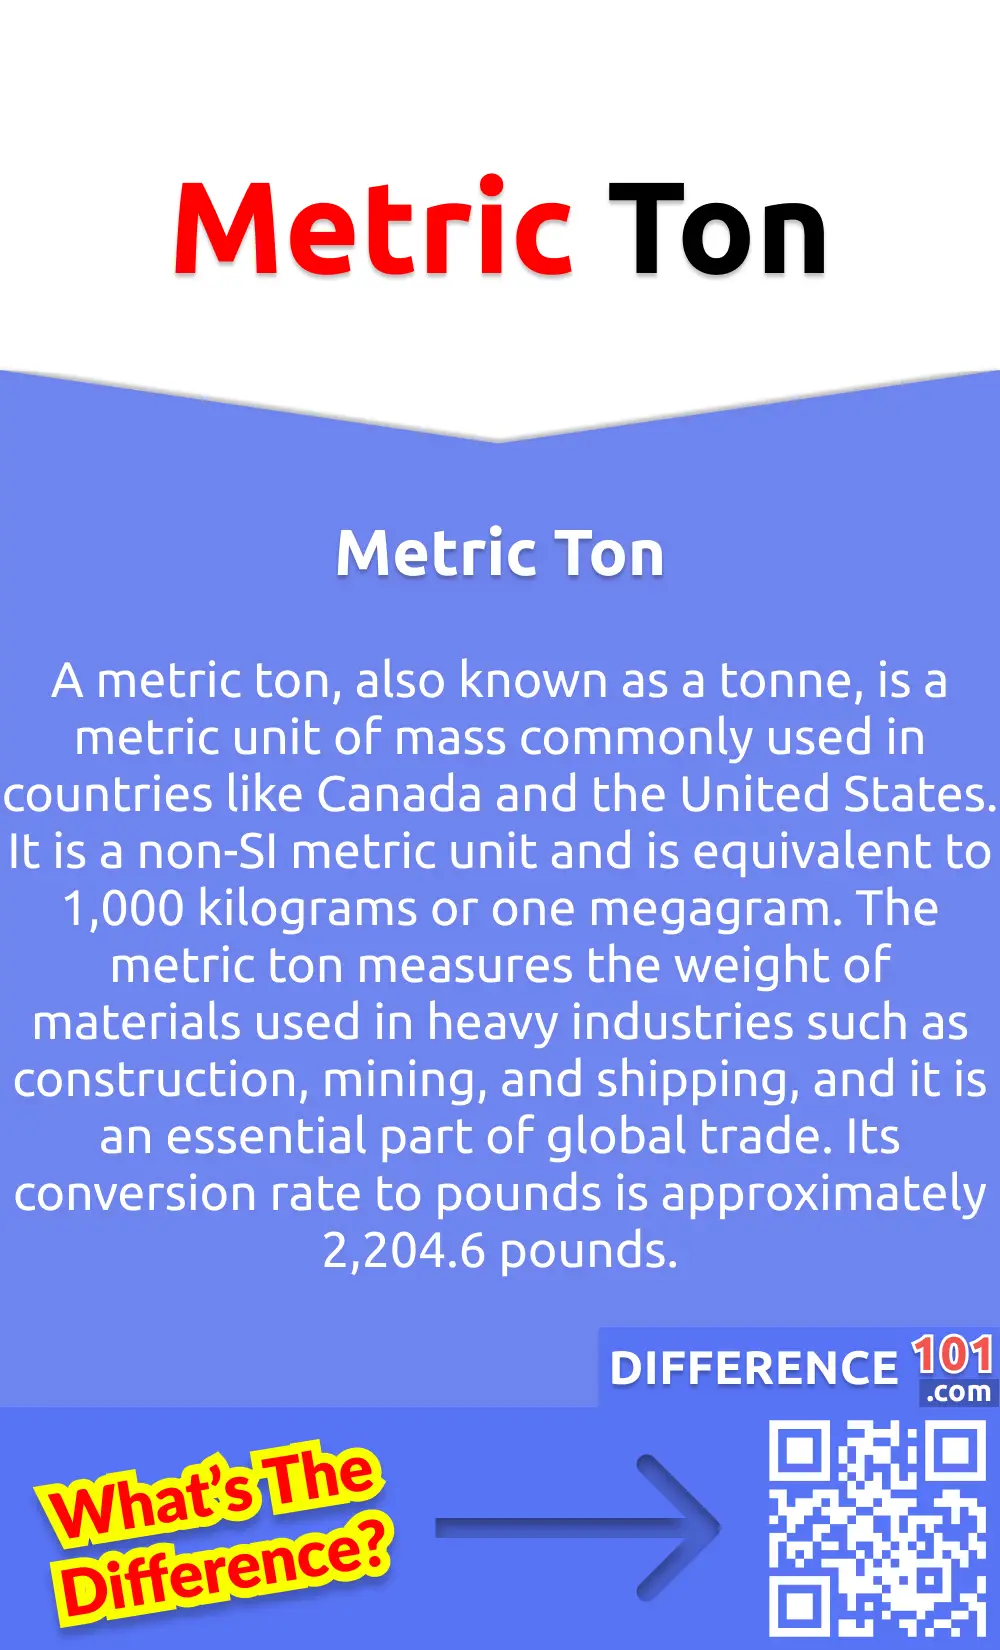 What Is Metric Ton? A metric ton, also known as a tonne, is a metric unit of mass commonly used in countries like Canada and the United States. It is a non-SI metric unit and is equivalent to 1,000 kilograms or one megagram. The metric ton measures the weight of materials used in heavy industries such as construction, mining, and shipping, and it is an essential part of global trade. Its conversion rate to pounds is approximately 2,204.6 pounds. The use of metrics is essential as it helps in promoting international trade and provides a standard unit of measurement for all countries, aiding in the exchange of goods and products.